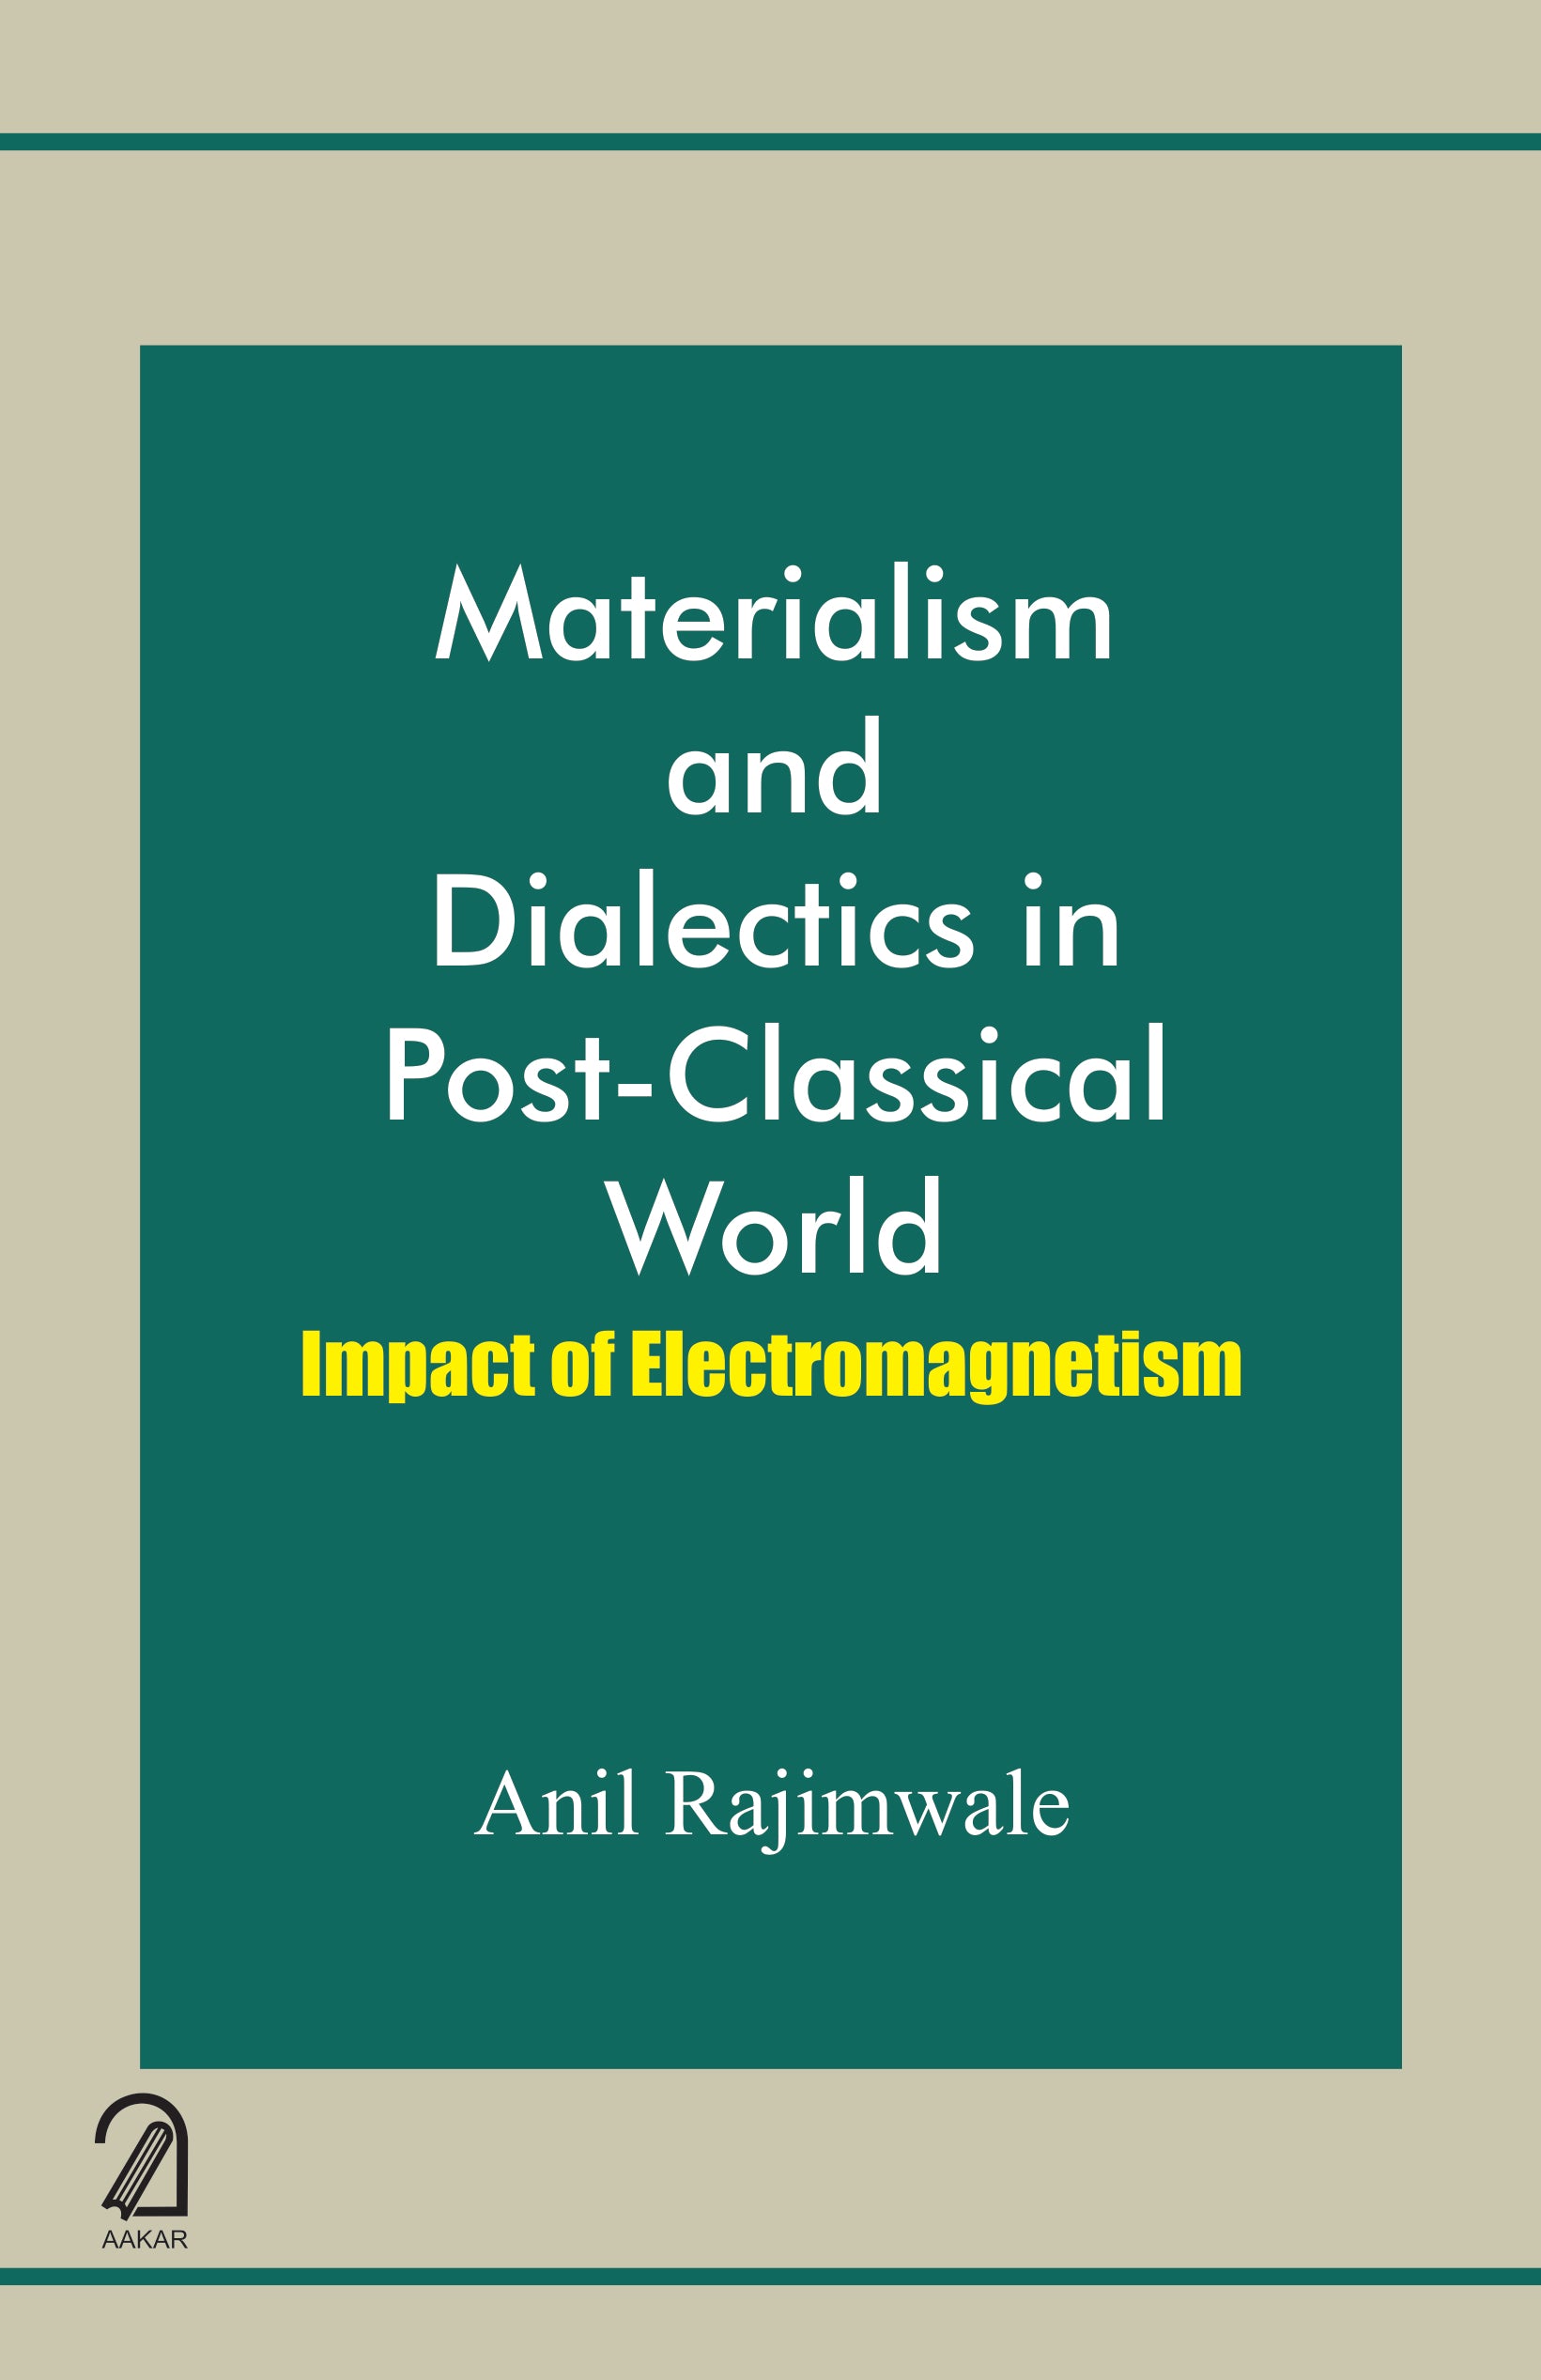 Materialism and Dialectics in Post-Classical World: Impact of Electromagnetism